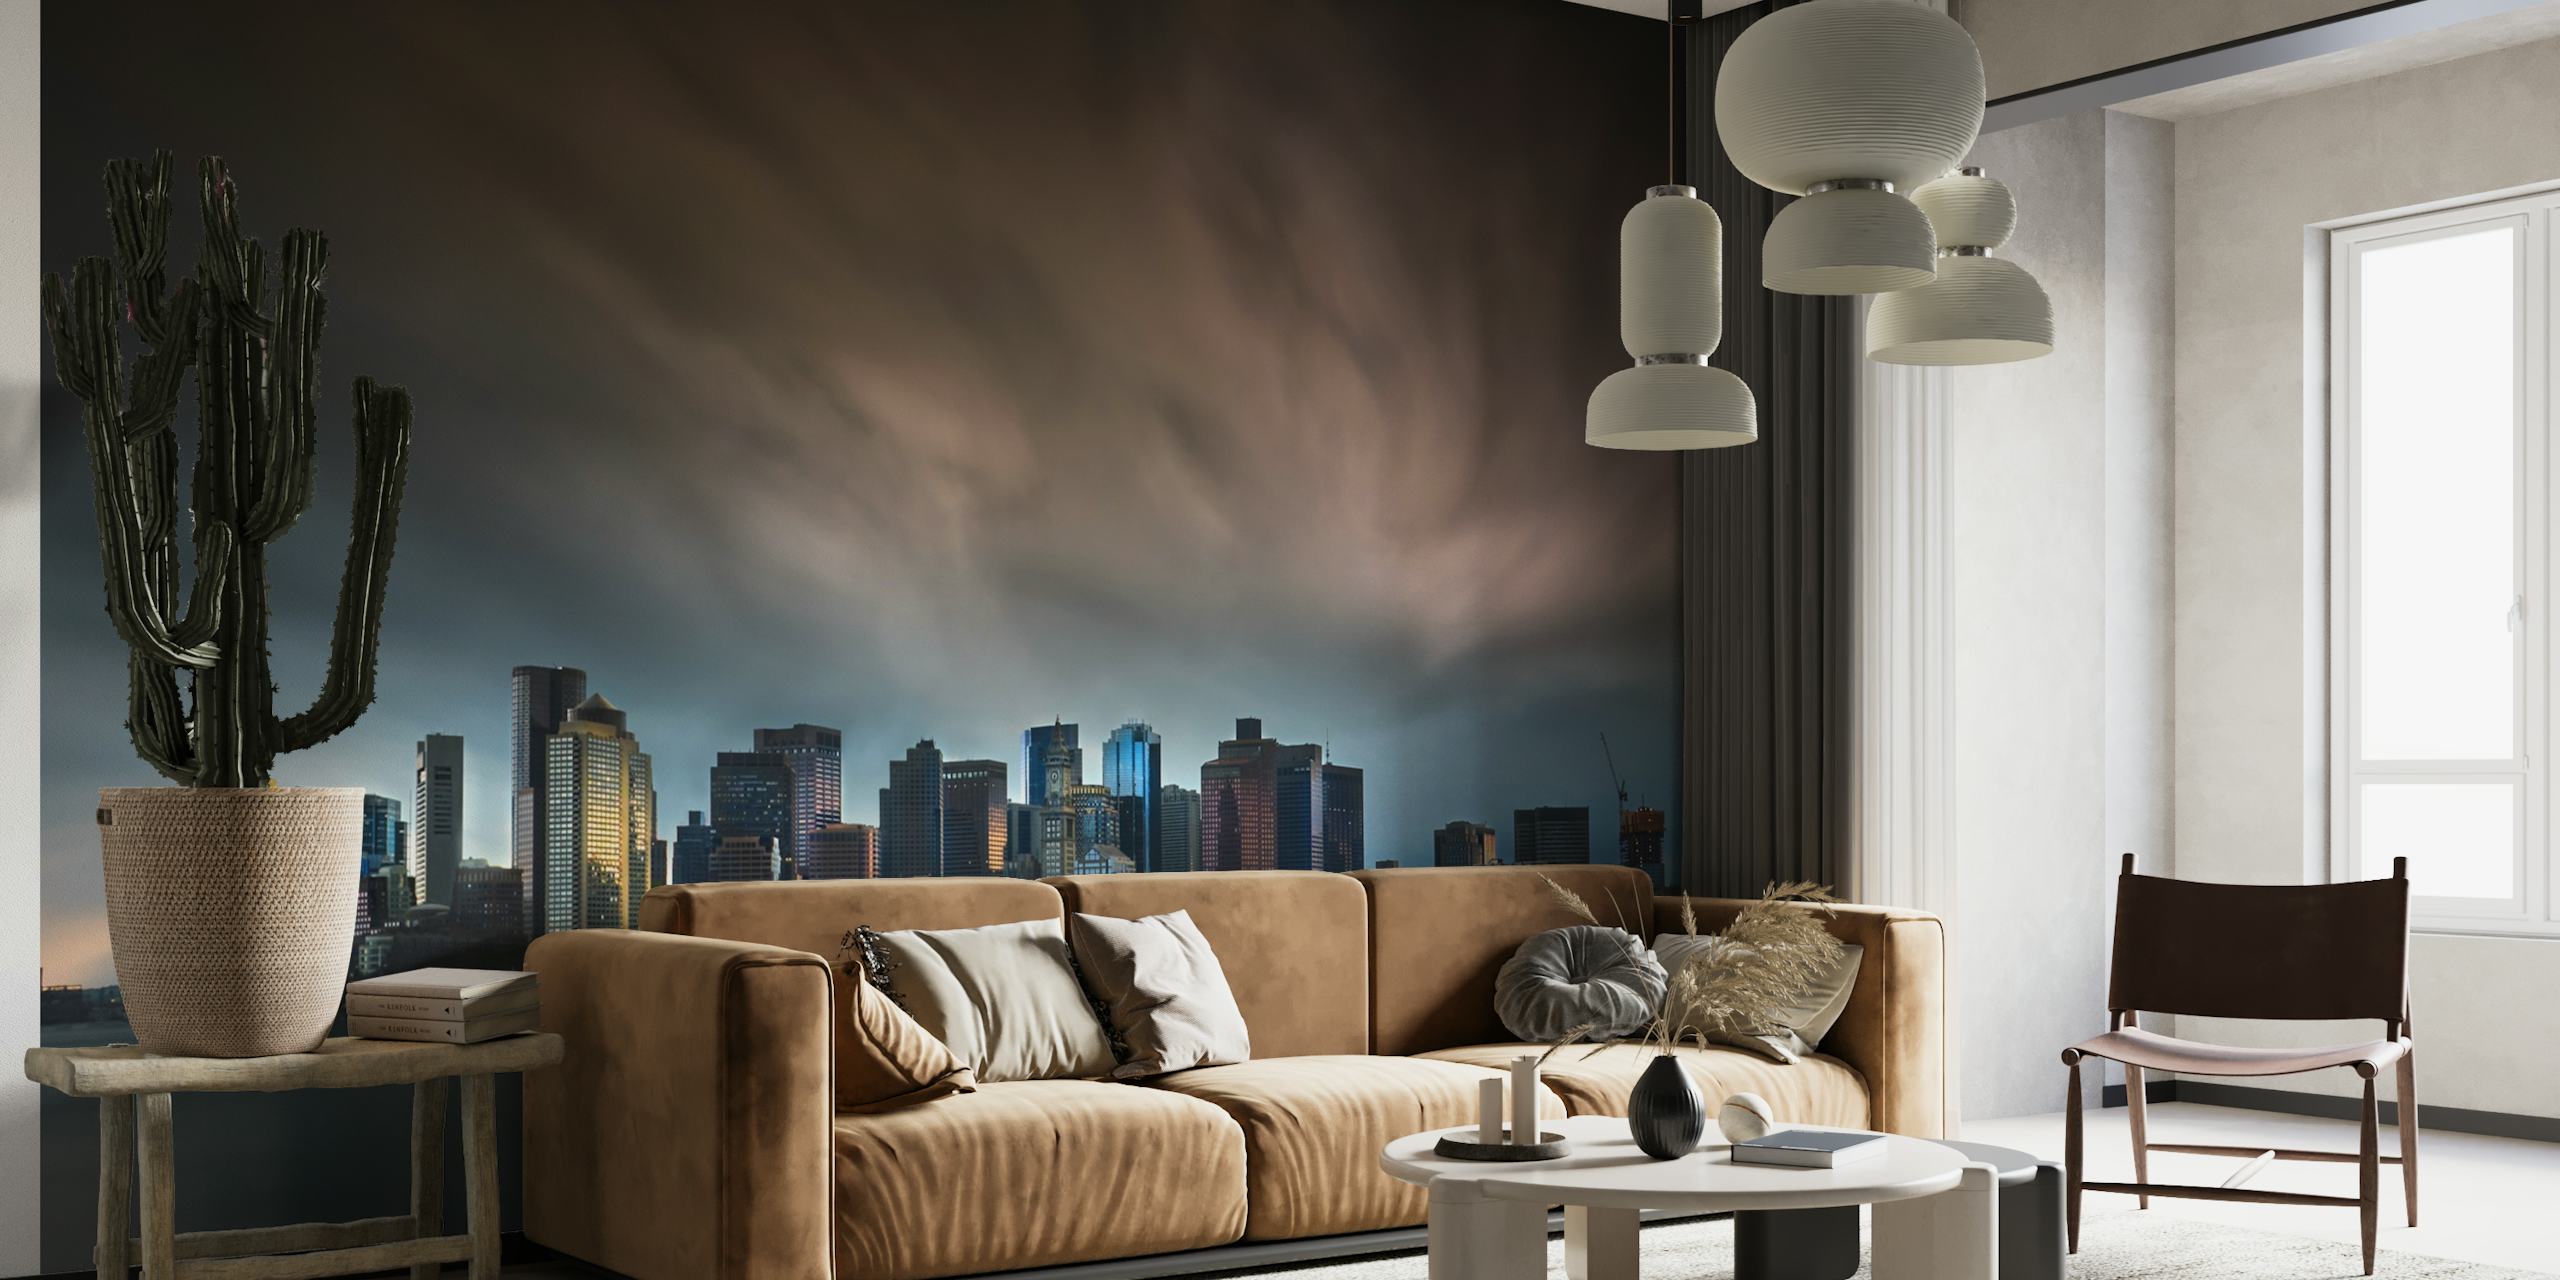 Boston skyline wall mural with dramatic clouds